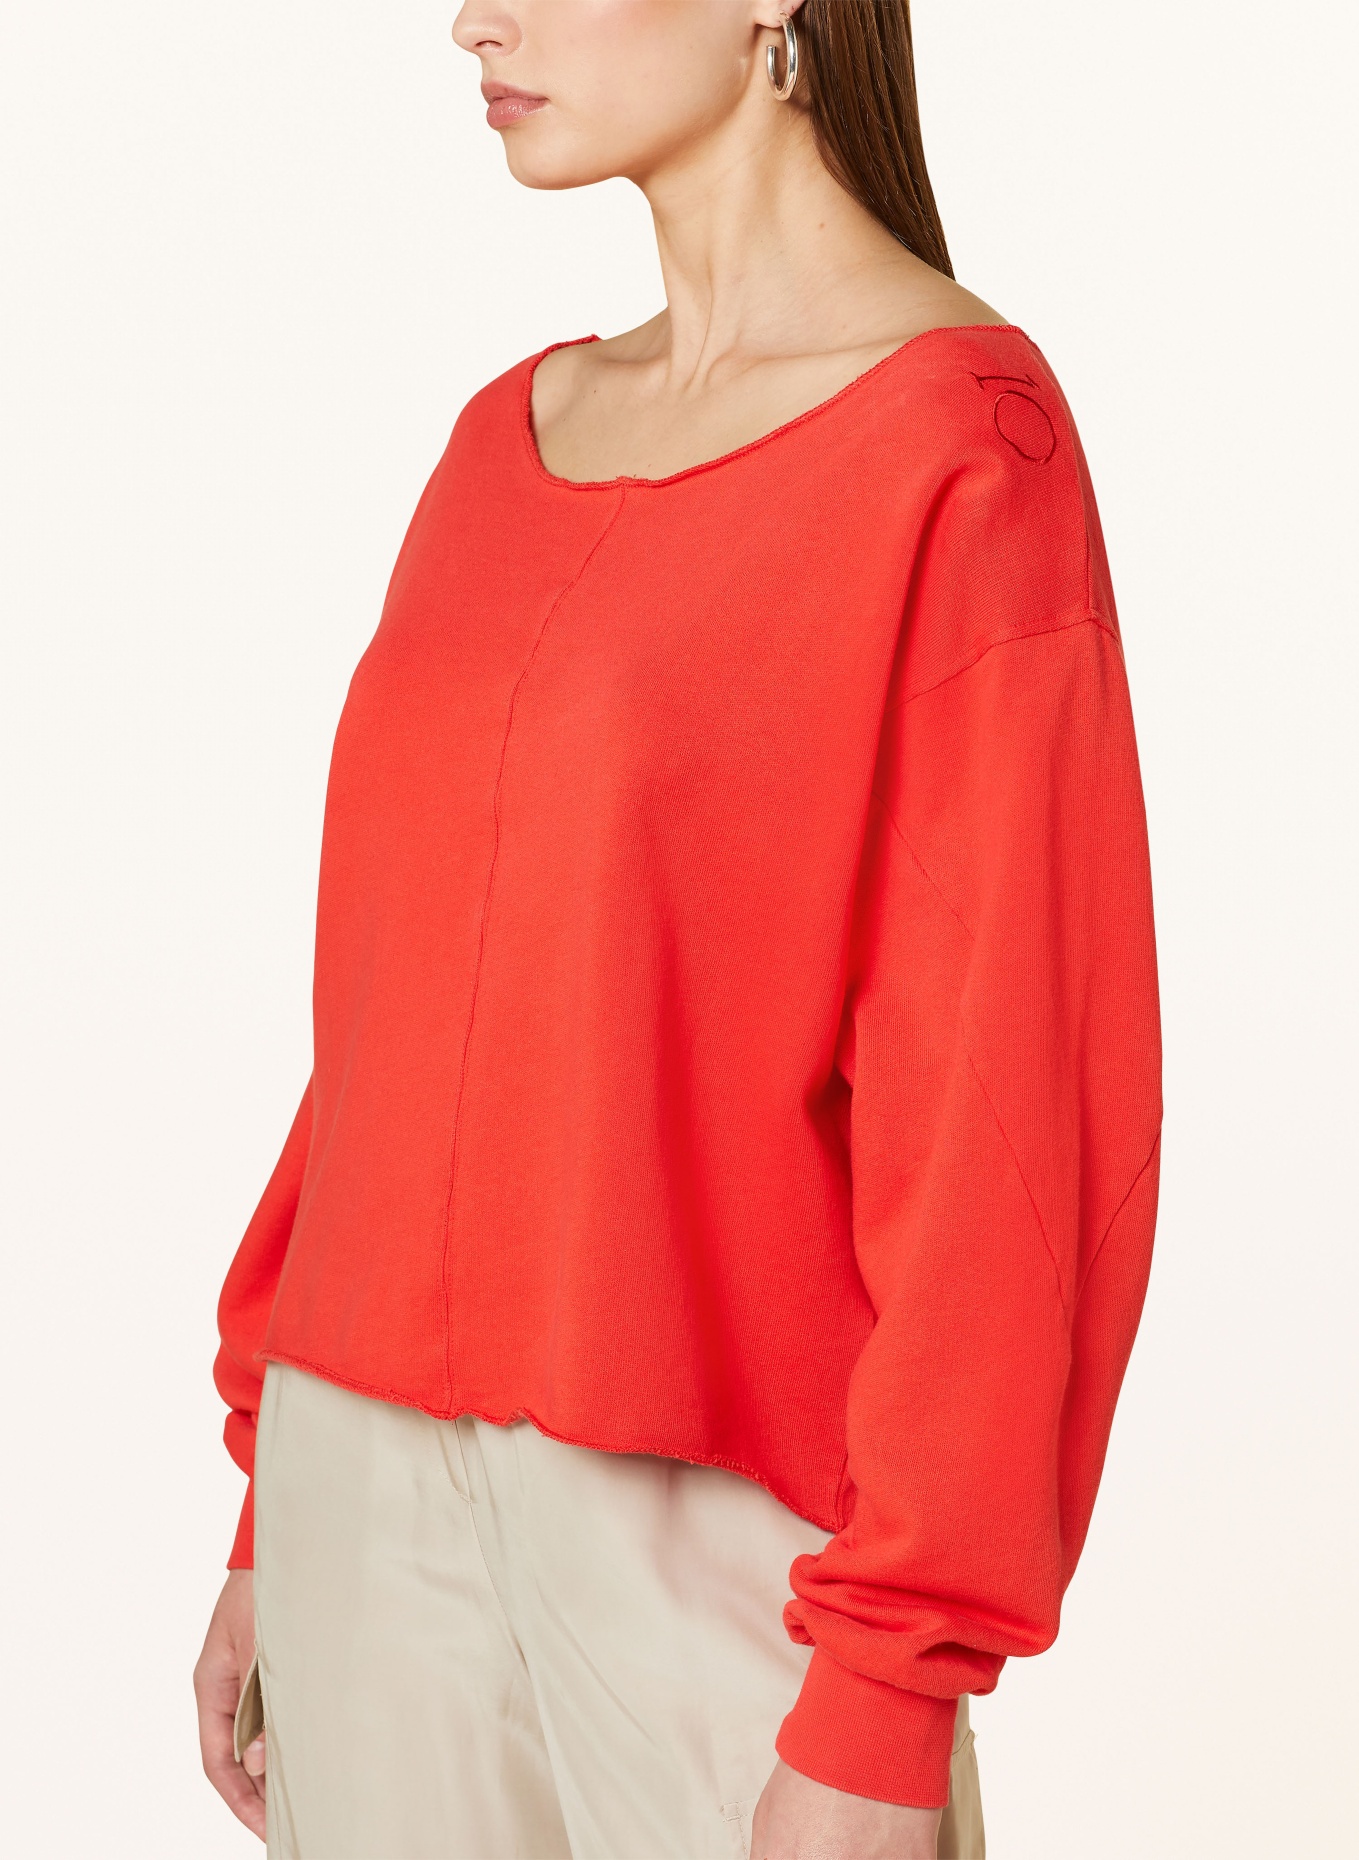 10DAYS Cropped sweatshirt, Color: RED (Image 4)